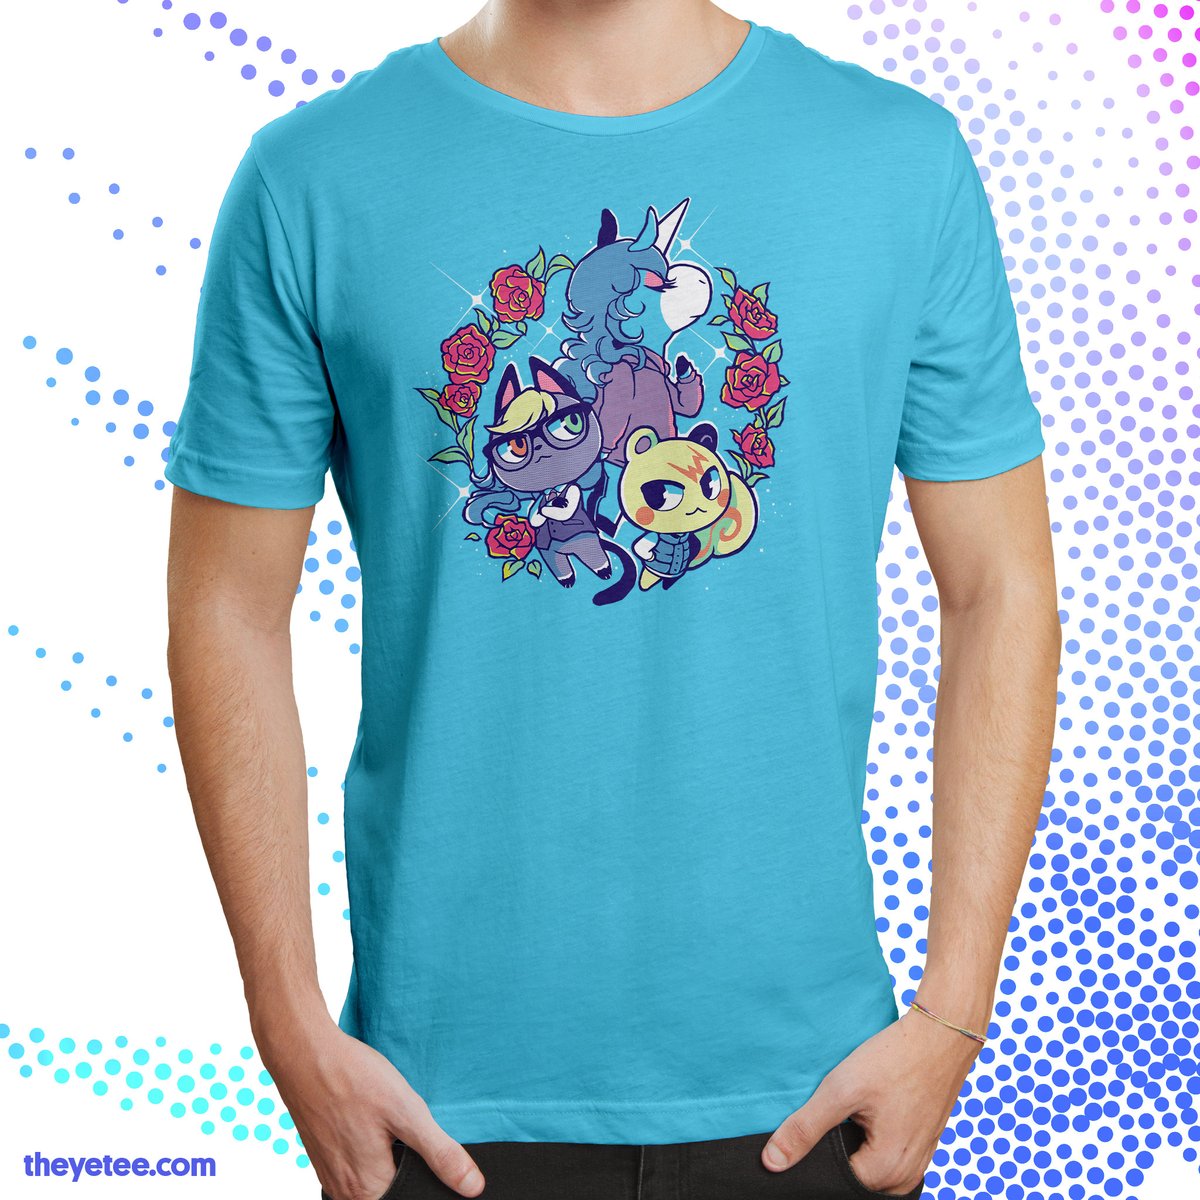 「And how's your neighbor doing these days」|The Yetee 🌈のイラスト